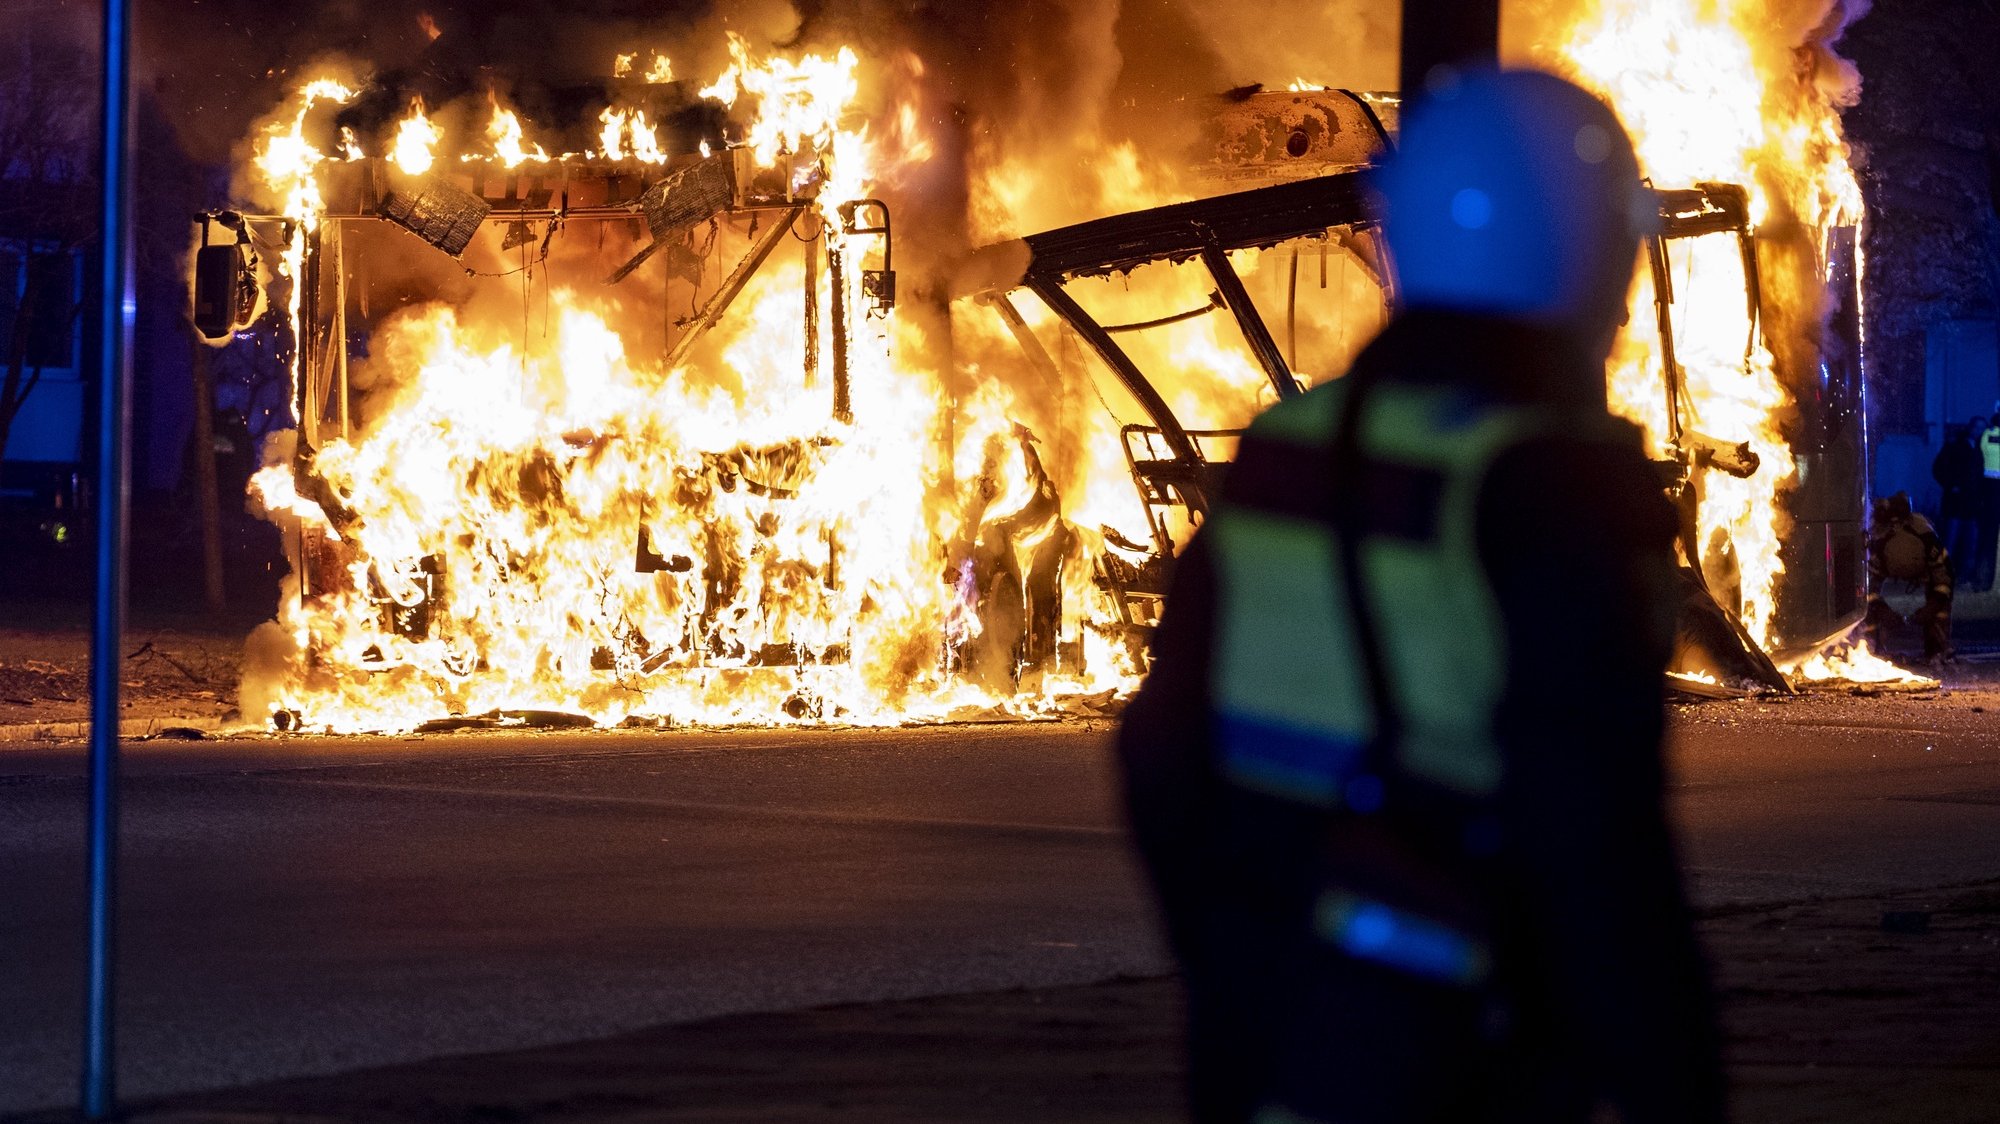 epa09894064 Riot police on site while a city bus burns on Vastra Kattarpsvagen on Rosengard in Malmo, Sweden, 17 April 2022. The unrest in Malmo has continued after Rasmus Paludan, party leader of the Danish right-wing extremist party Tight Course, held a demonstration at Skanegarden near the Oresund Bridge. Paludan had received permission for a gathering in Landskrona, but the police moved the demonstration to Malmo.  EPA/Johan Nilsson  SWEDEN OUT